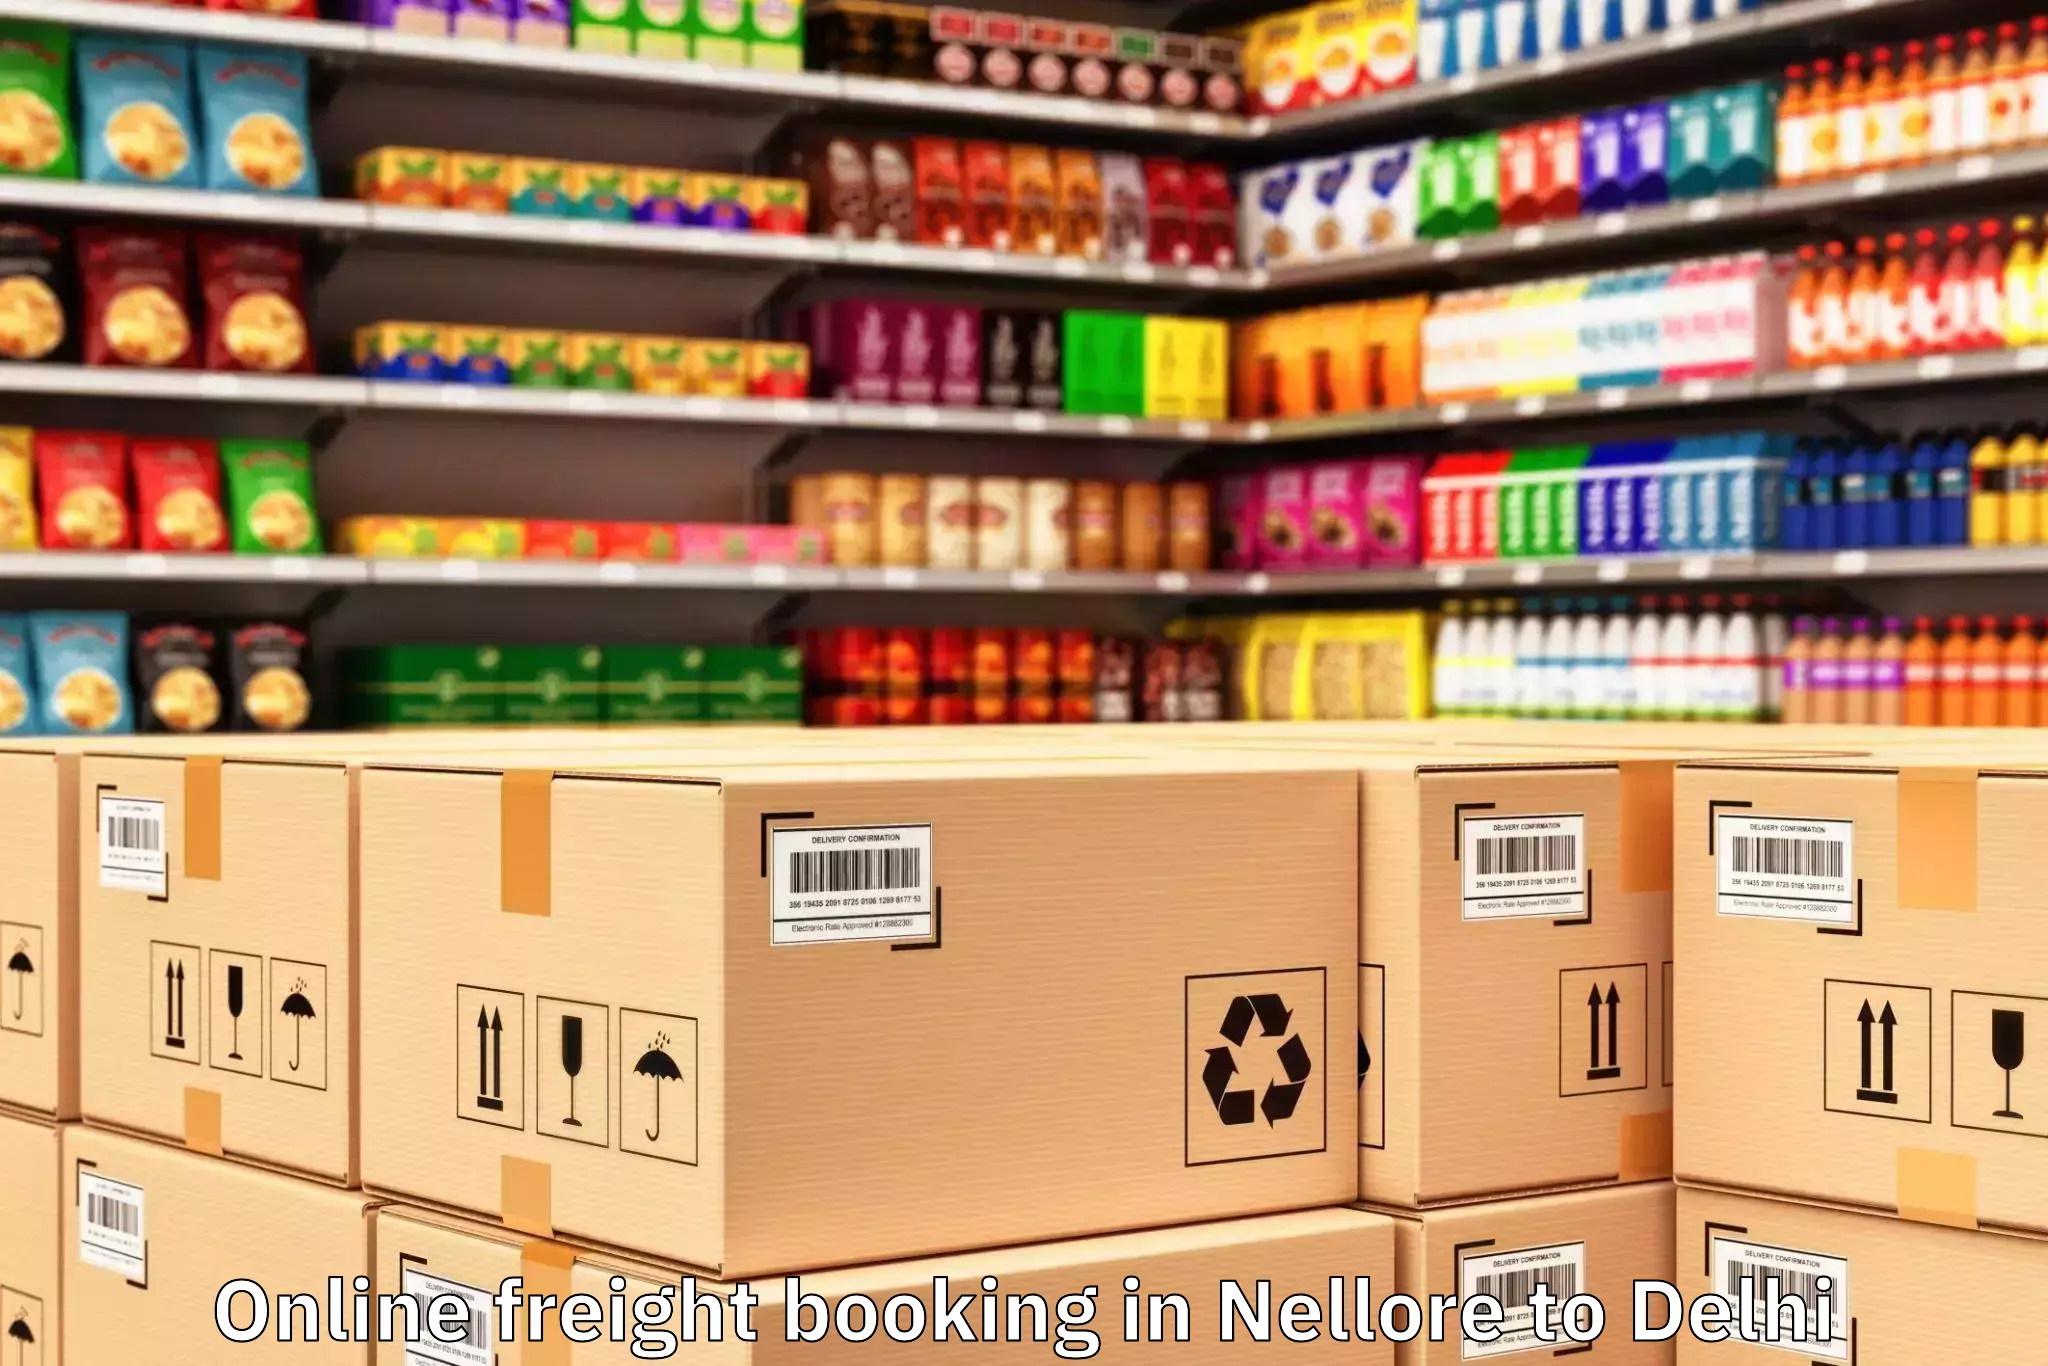 Professional Nellore to Garhi Online Freight Booking